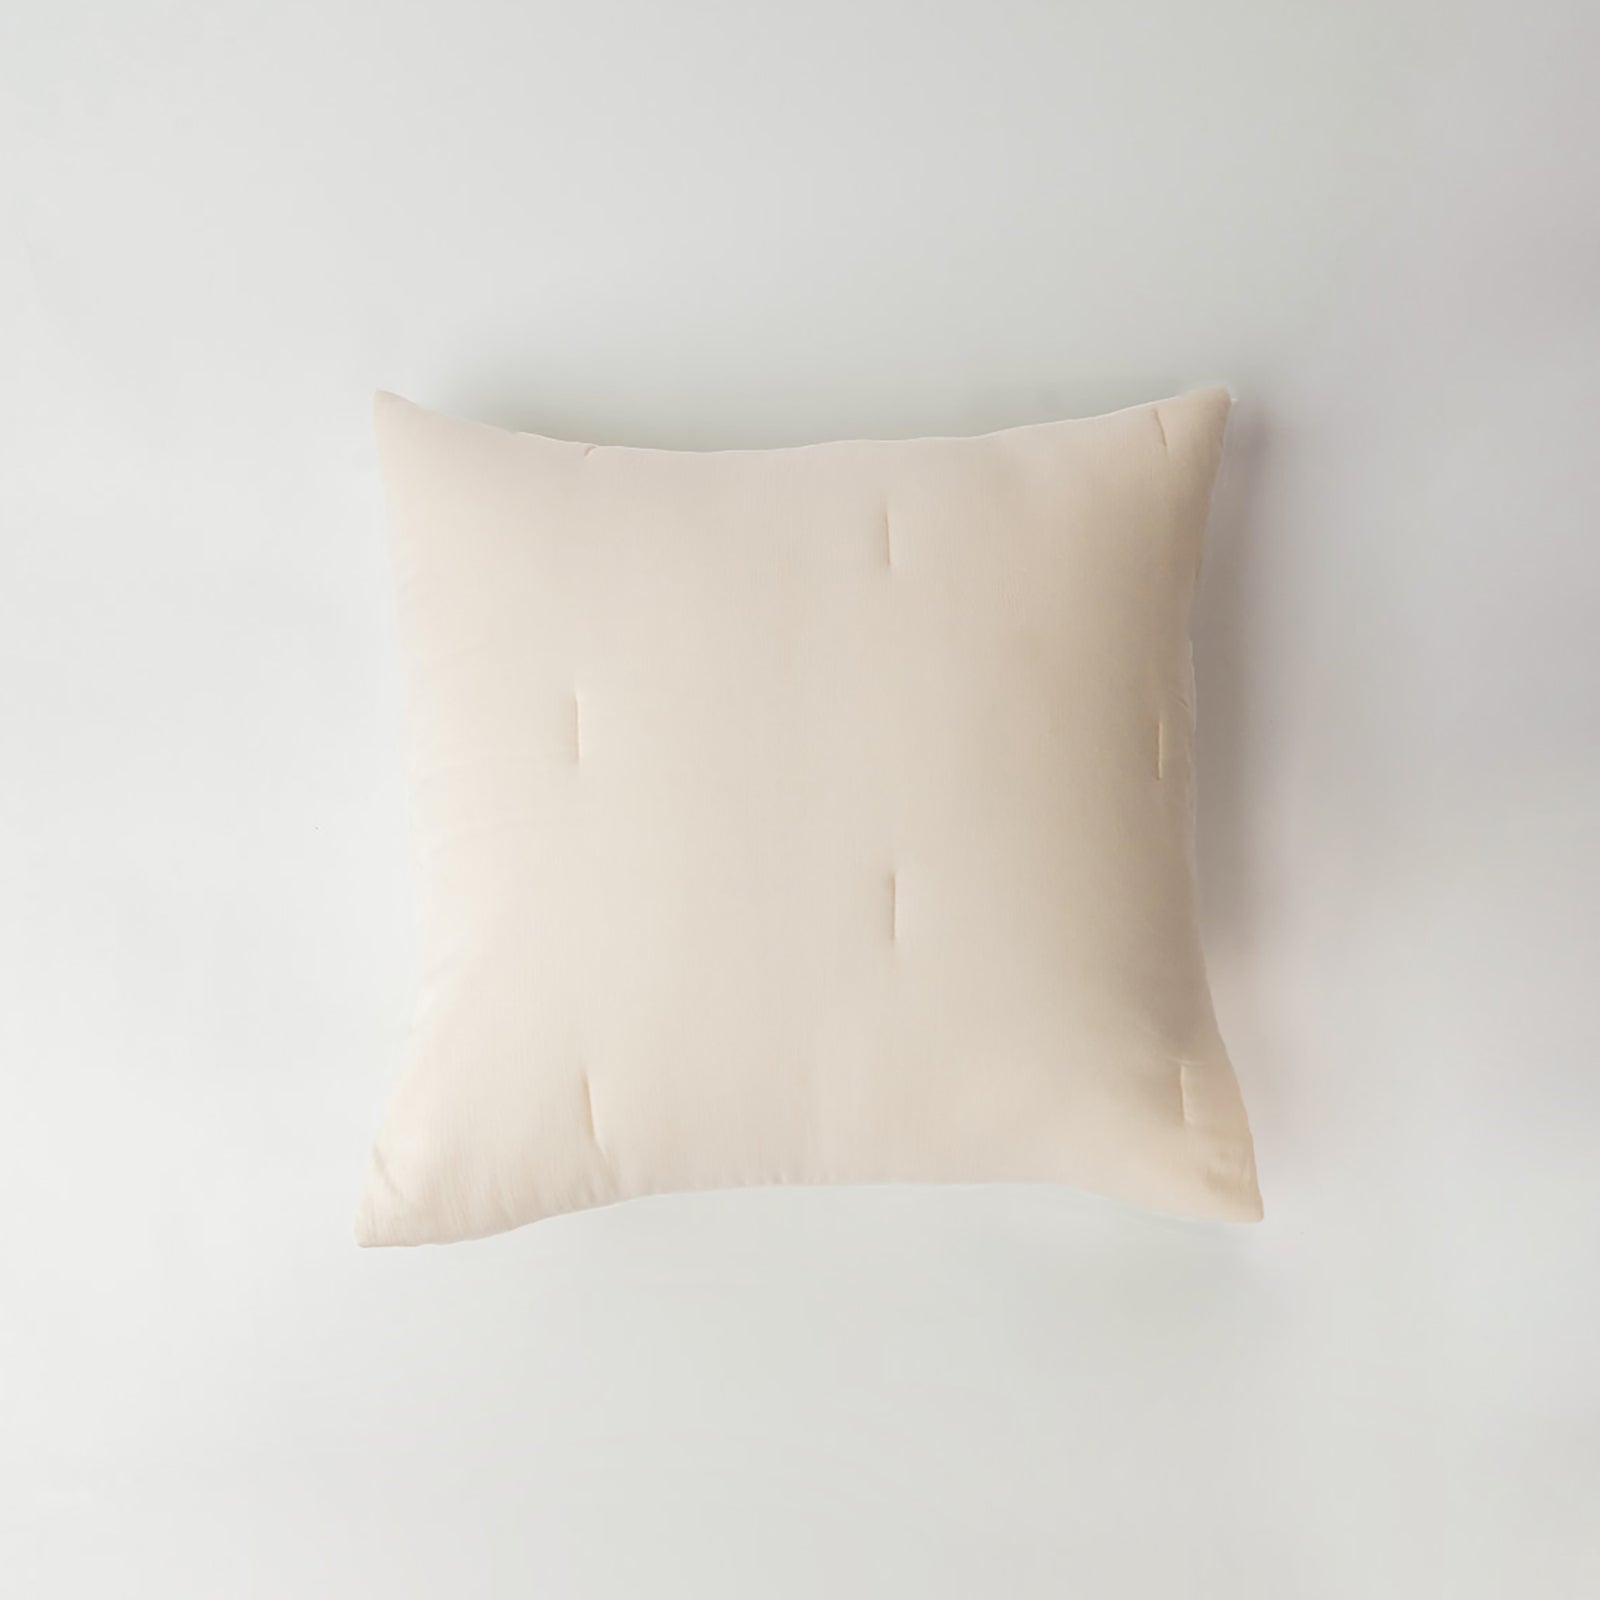 Buttermilk Aire Bamboo Puckered Shams. The sham is photographed with a white background